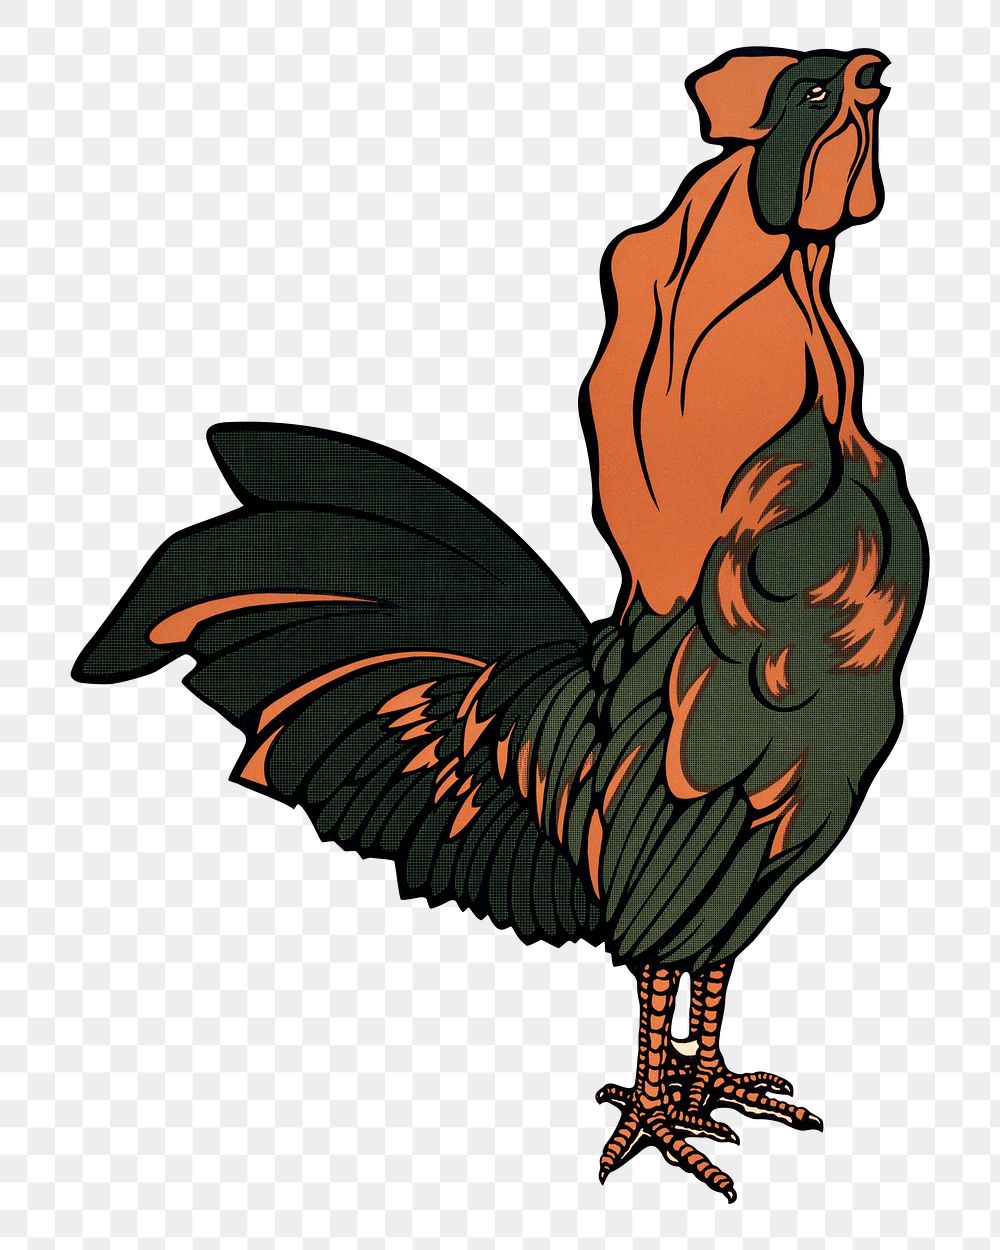 Vintage rooster png sticker, animal illustration, transparent background.  Remixed by rawpixel.